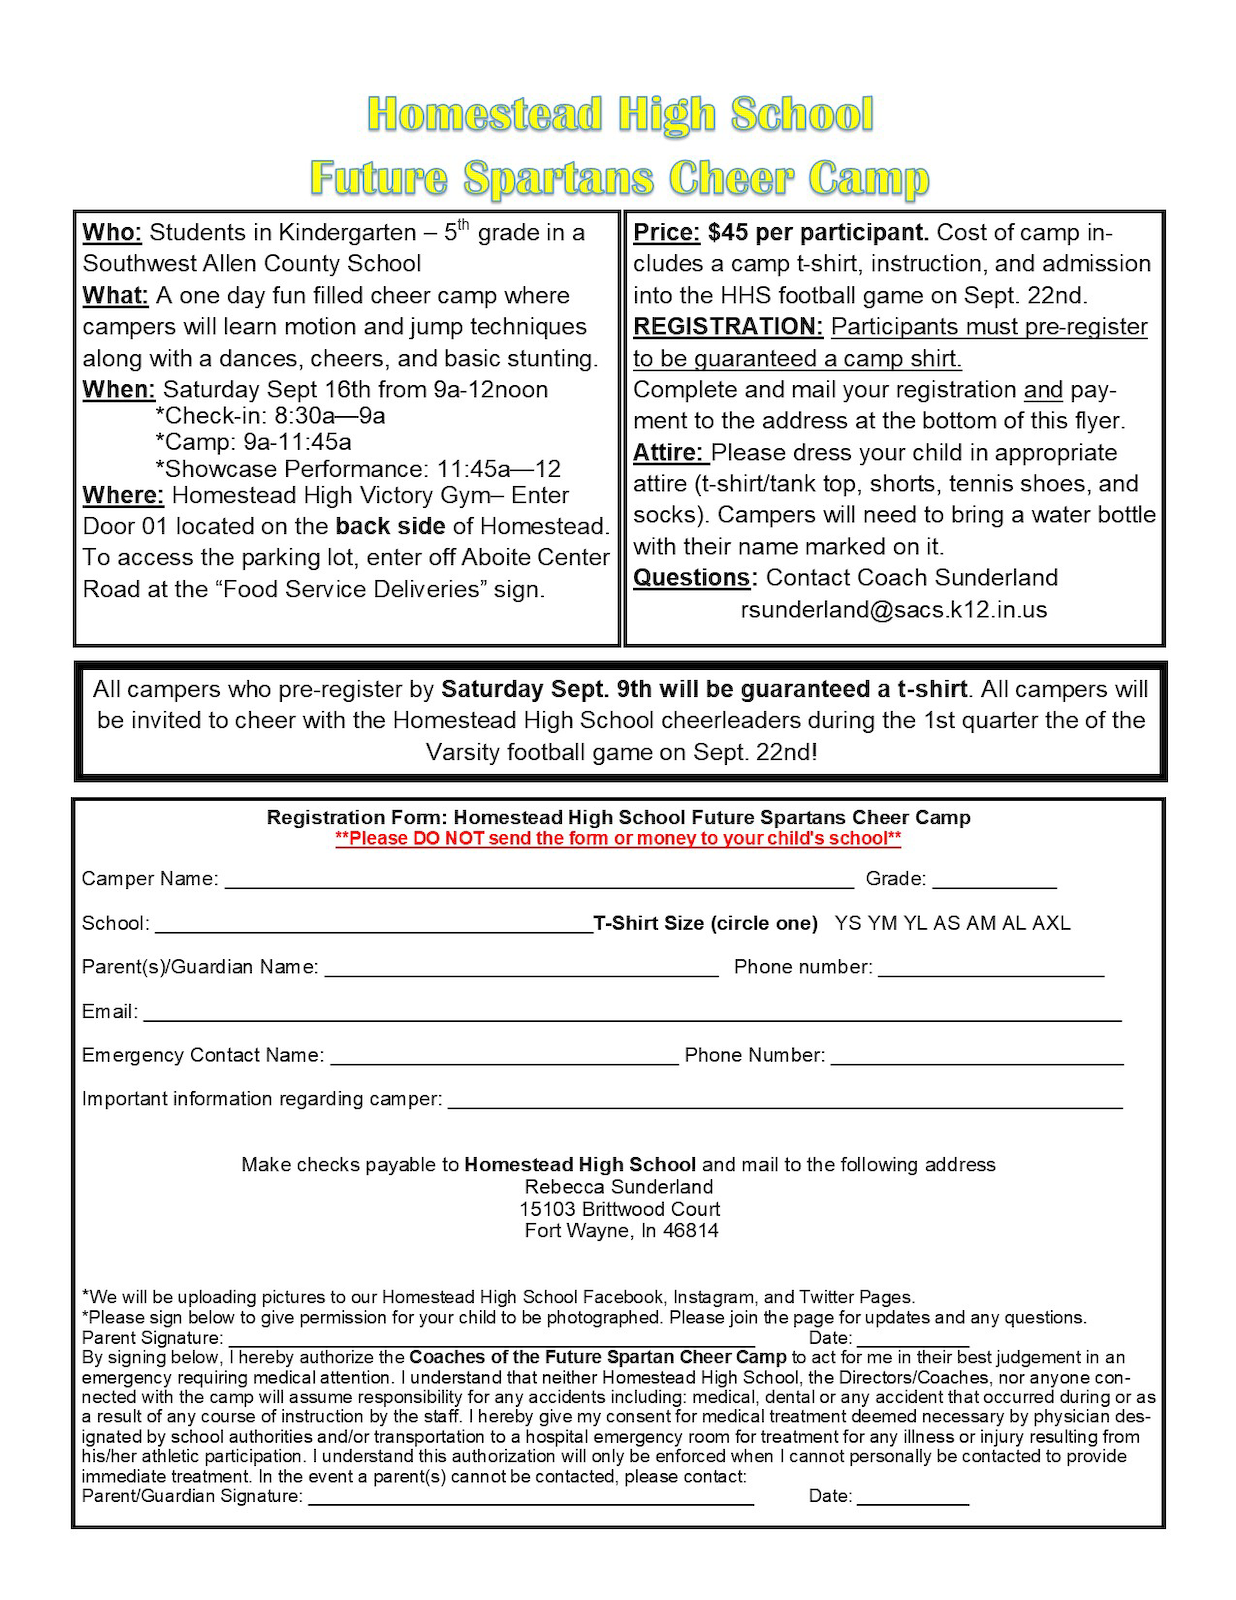 Future Spartan Cheer Camp Flyer (002) - updated date.png